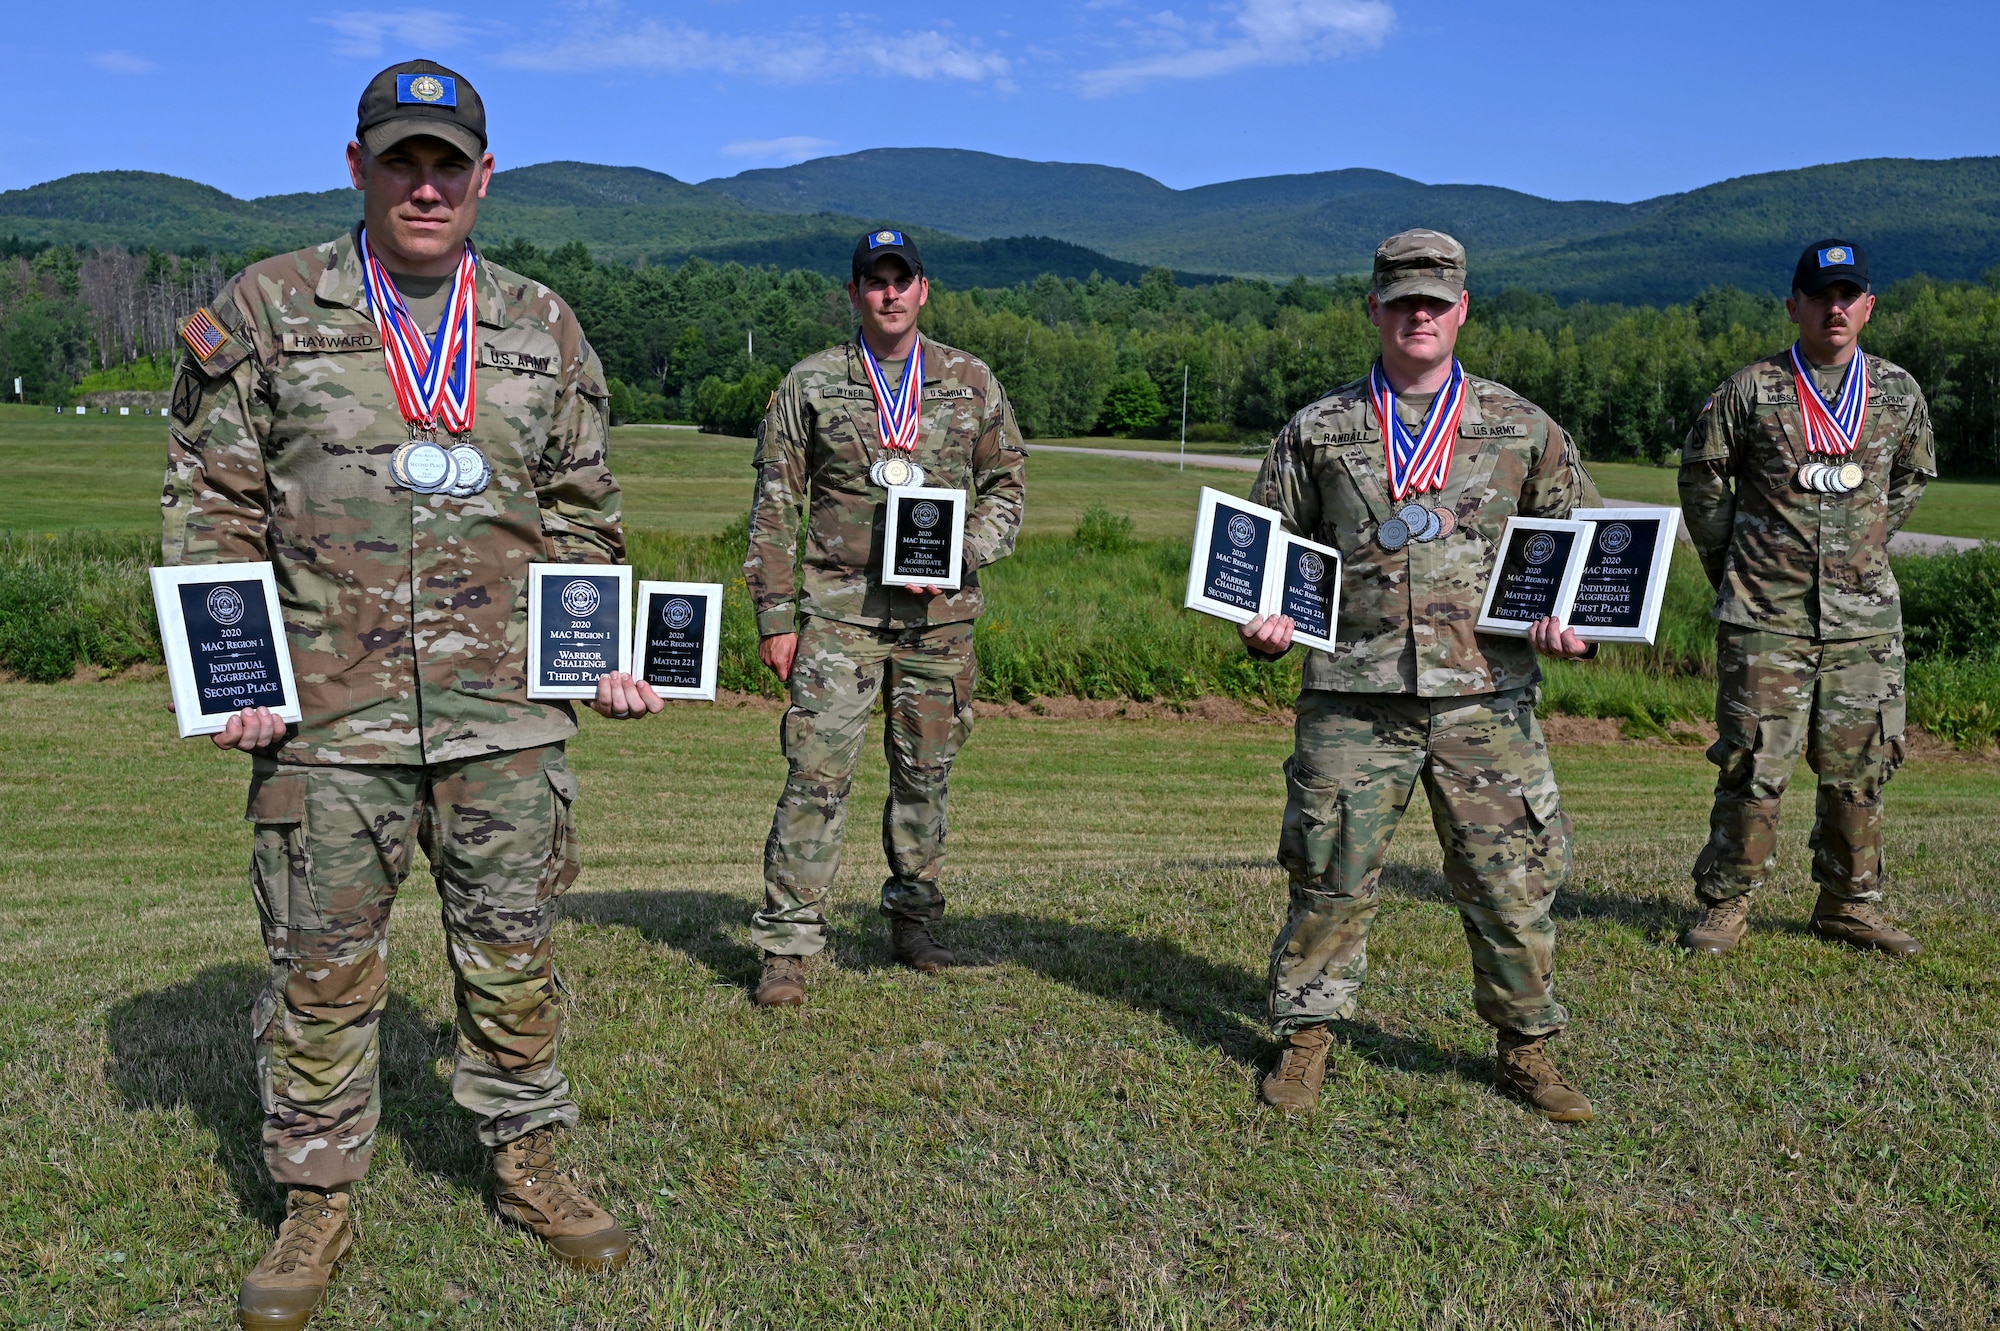 From left, Maj. Brooks Hayward, Staff Sgt. Joseph Wyner, Capt. Patrick Randall and Staff Sgt. David Musso show off their medals and plaques won at the 2020 Military Advisory Council Region 1 (MAC 1) shooting match on Aug. 23, 2020, at Camp Ethan Allen Training Site in Jericho, Vt.